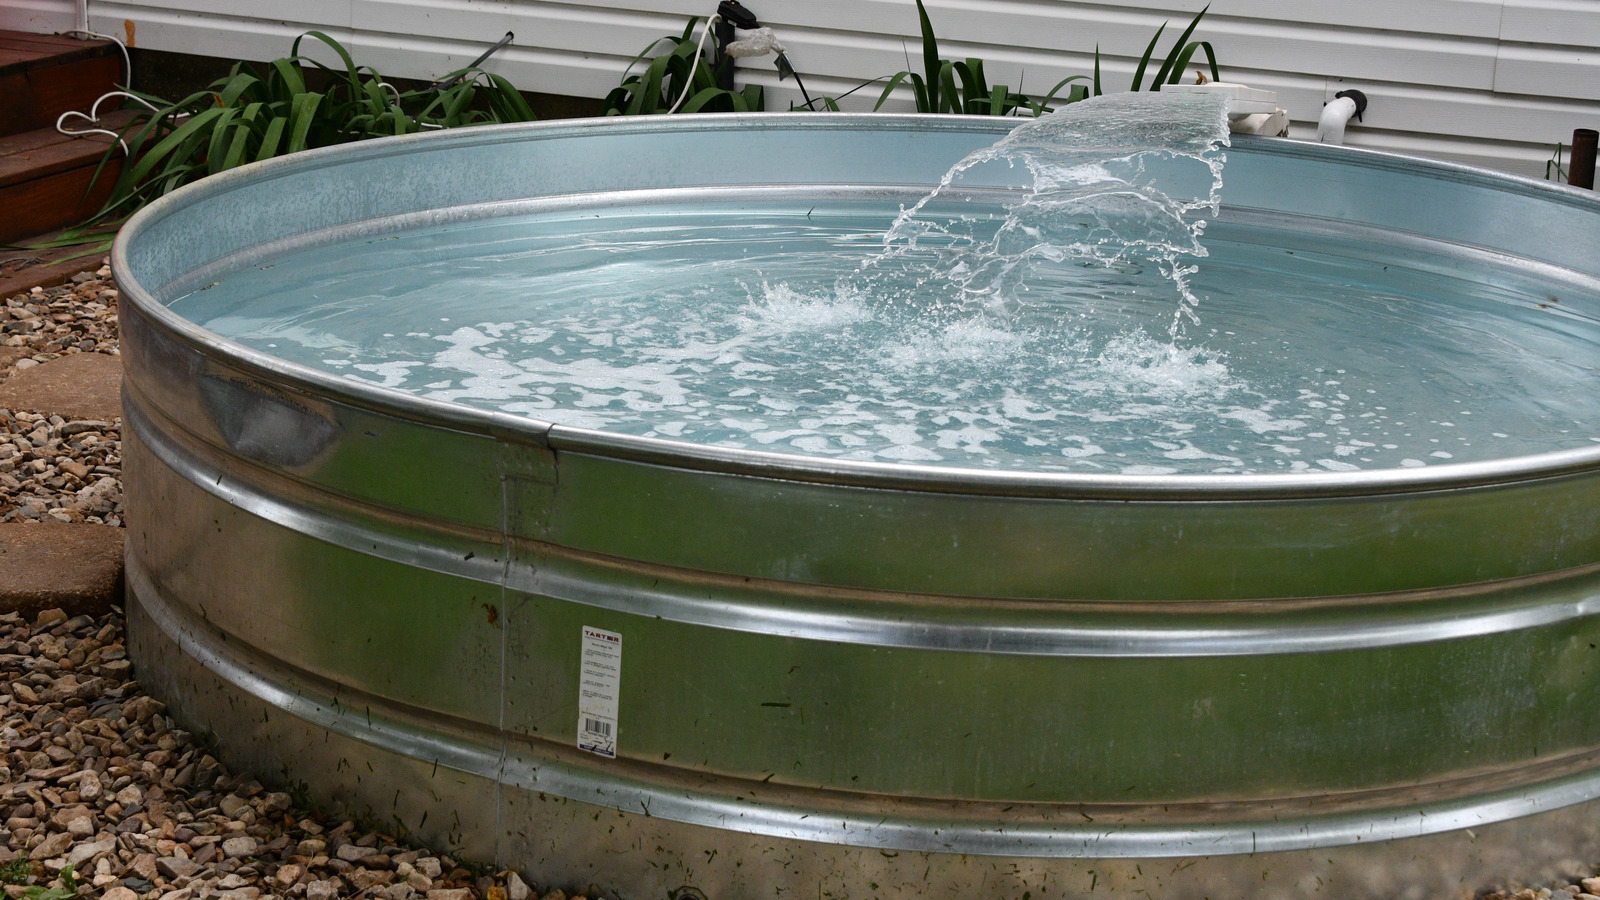 https://www.housedigest.com/img/gallery/heres-how-to-convert-your-stock-tank-pool-into-a-hot-tub/l-intro-1682687649.jpg